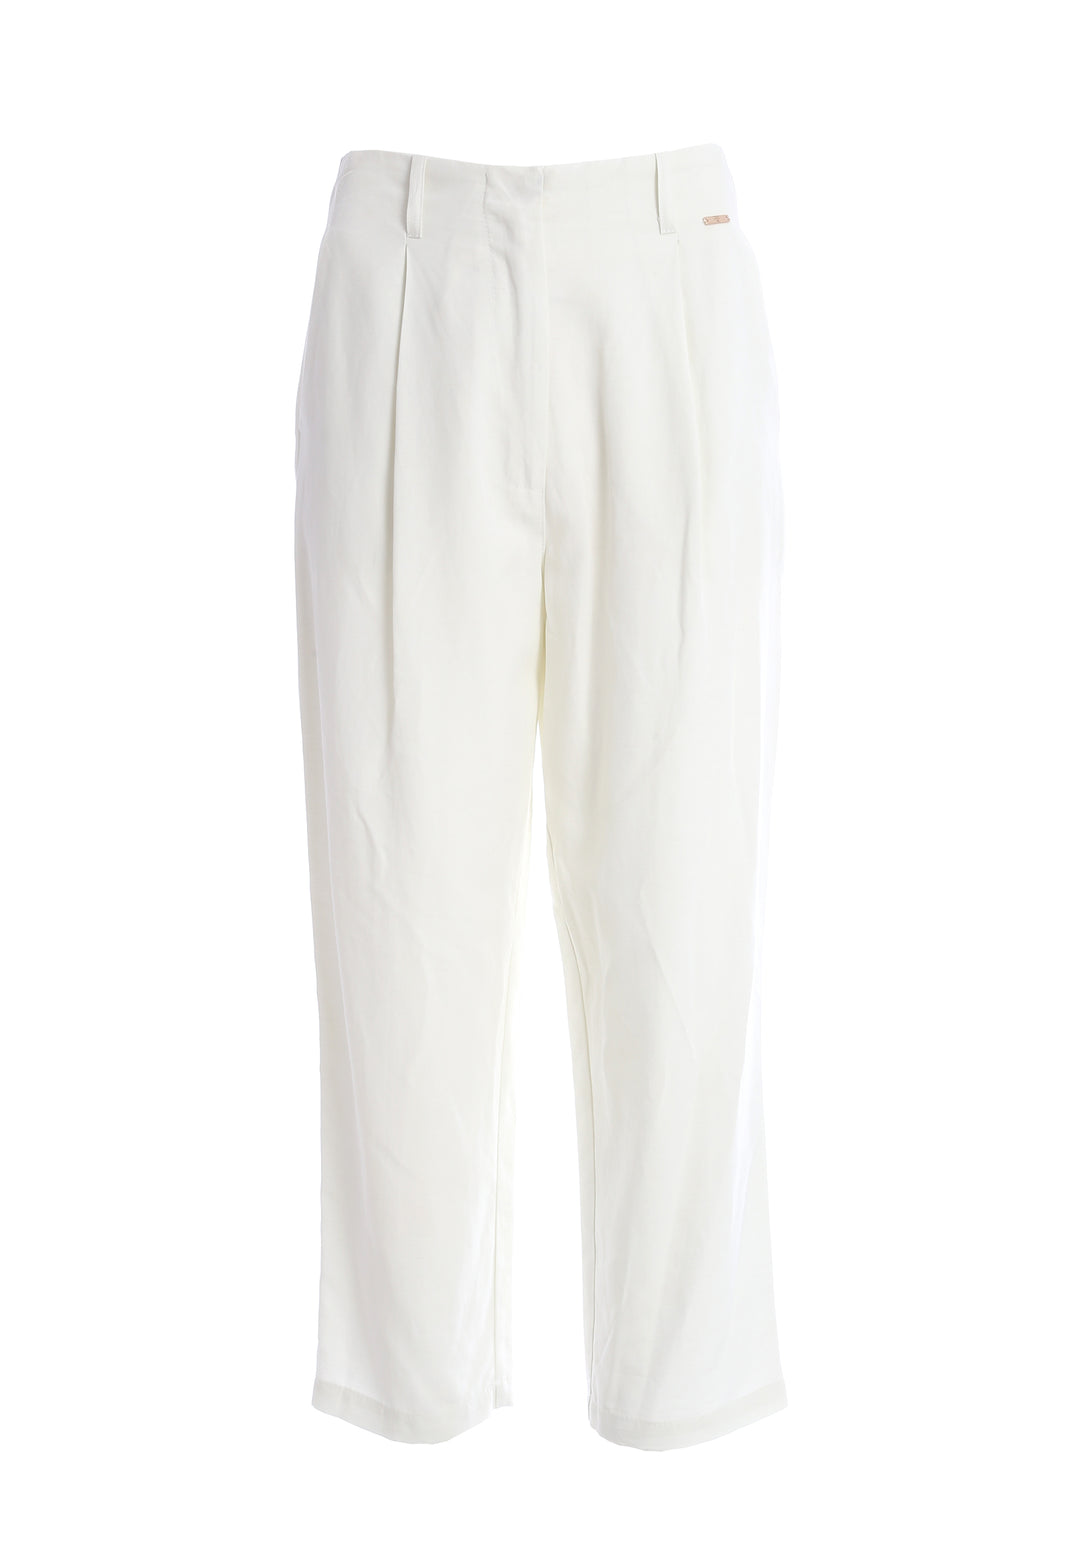 Cargo pant made in cotton and linen